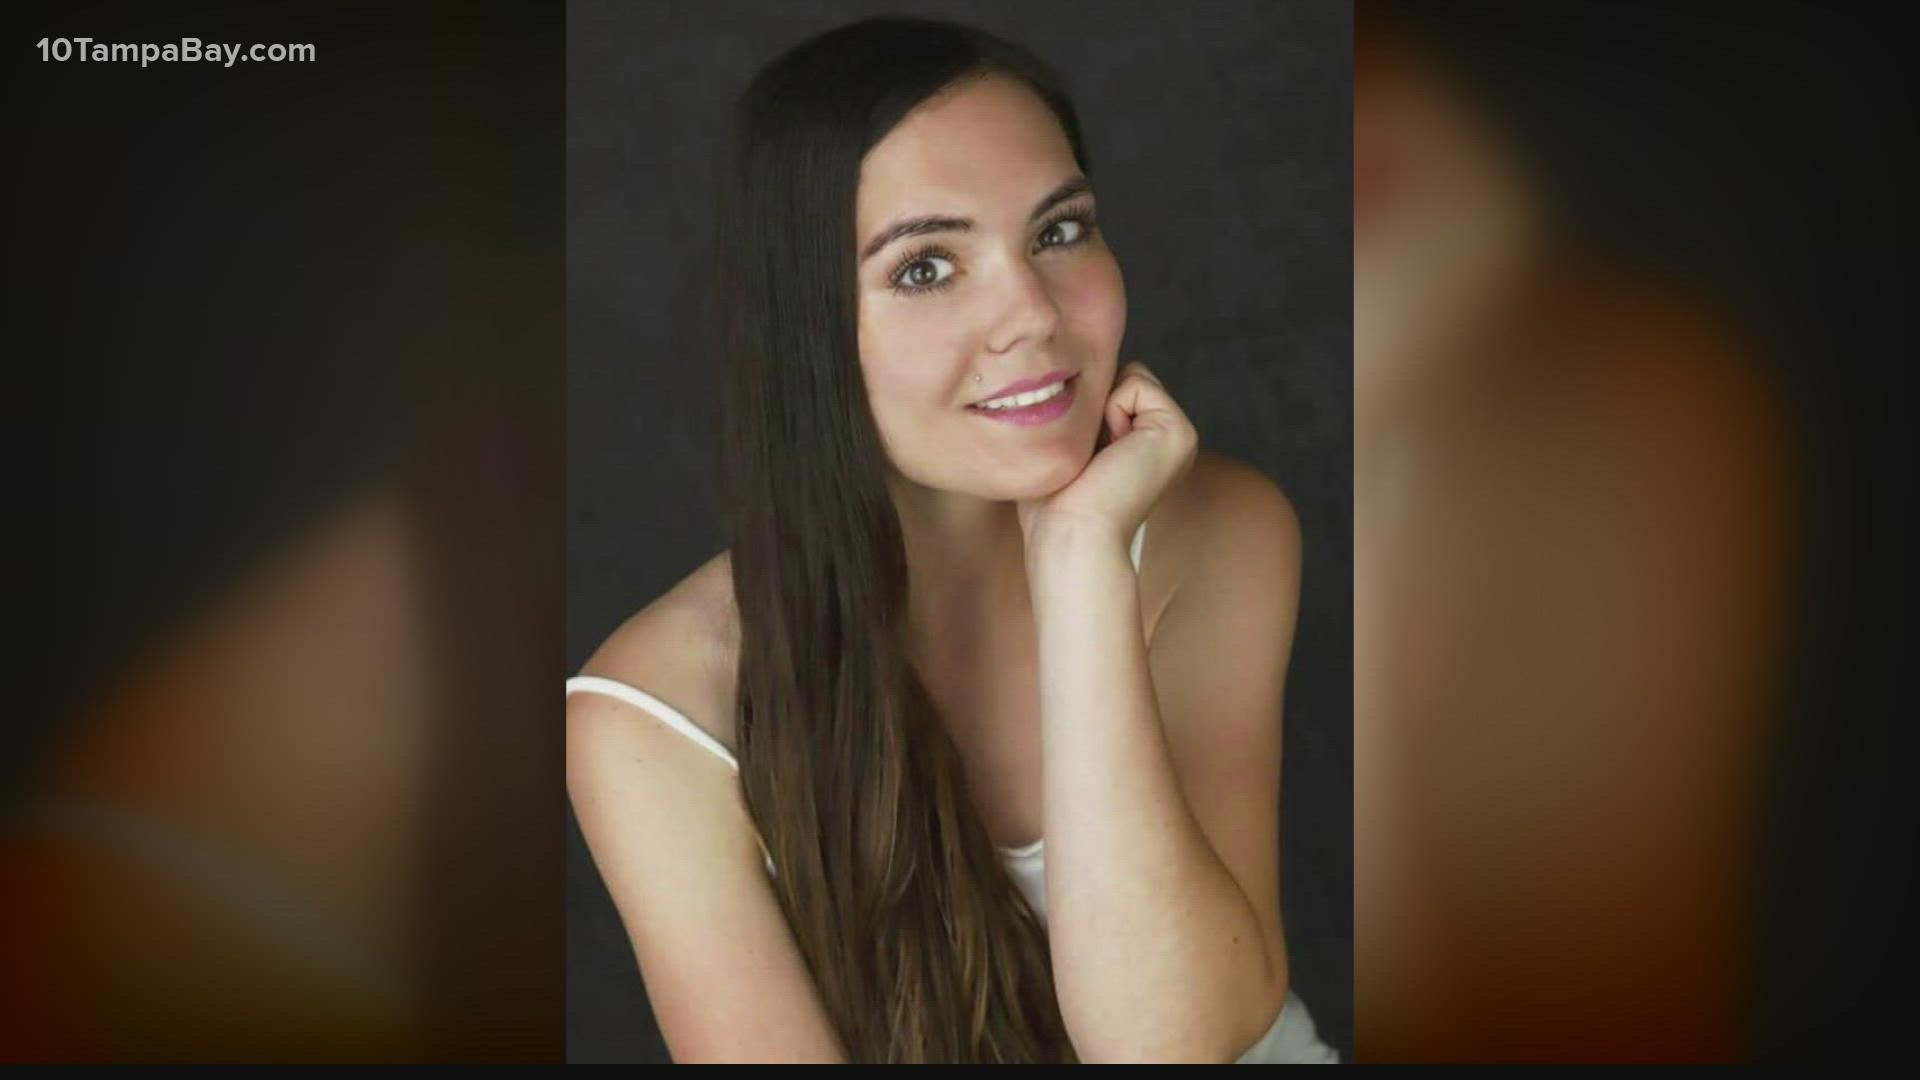 27-year-old Angelina Failla is a mother of two young children. She disappeared on Aug. 7th.